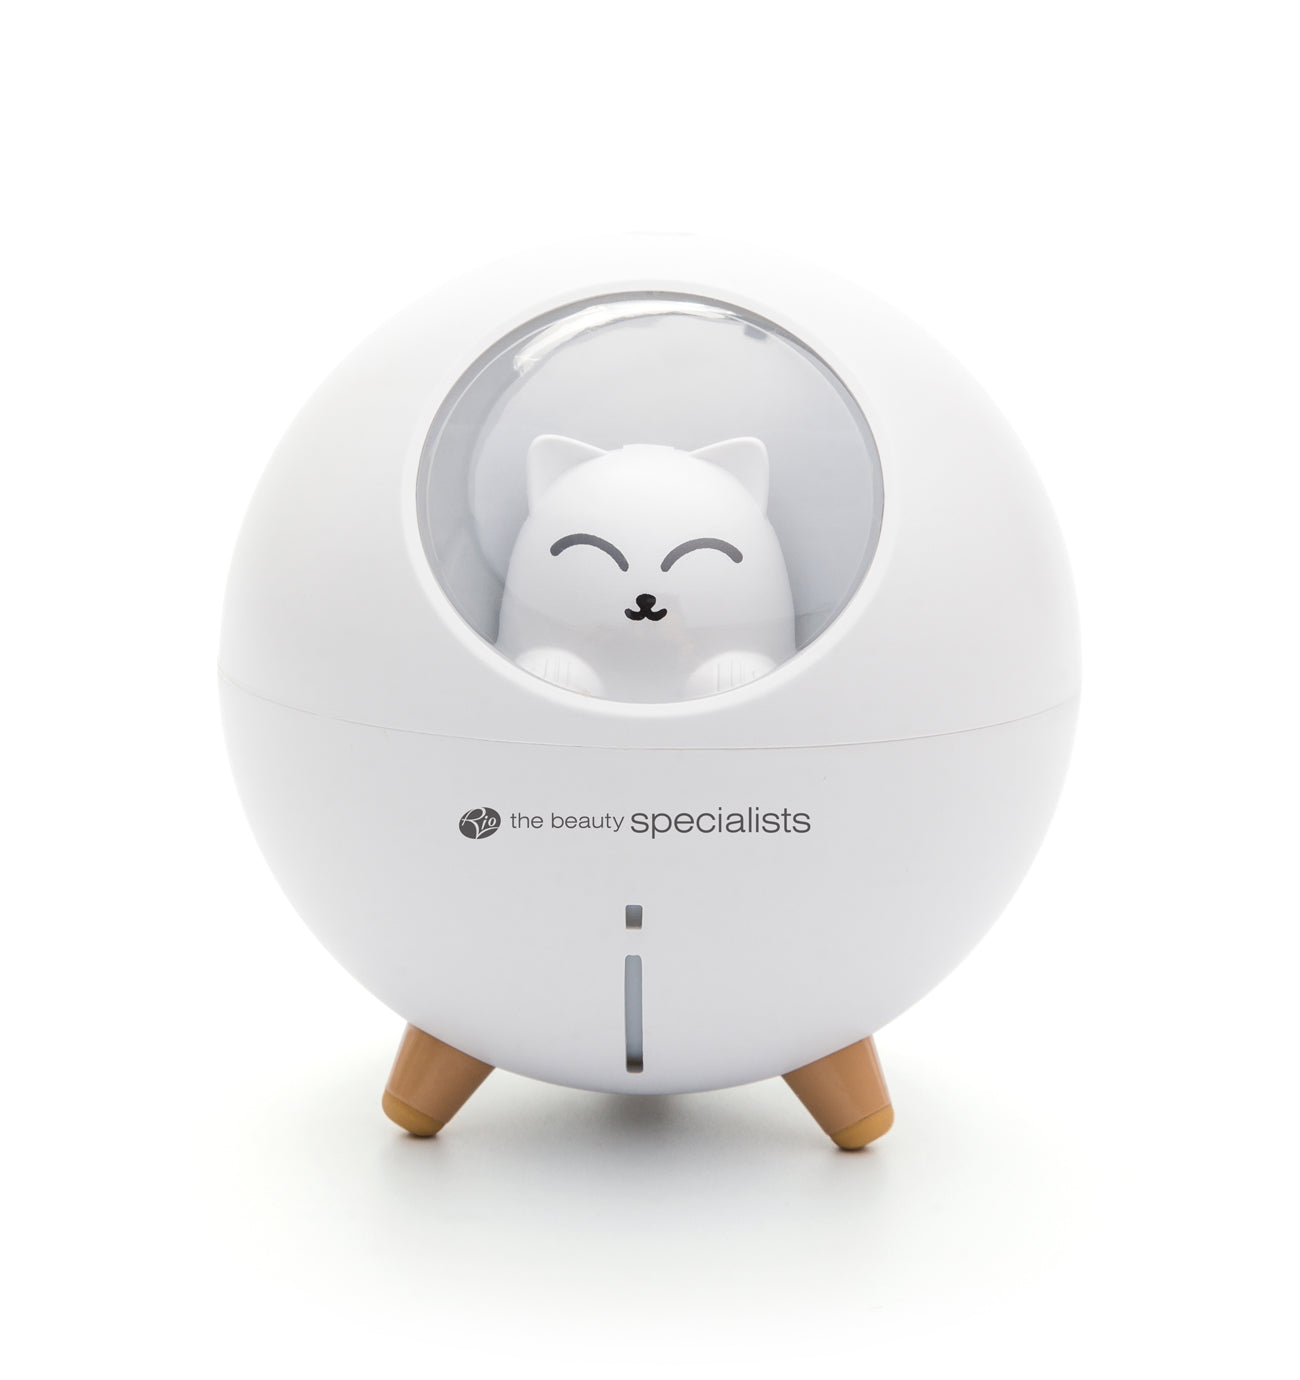 MIA Cat Childrens Essential Oil Diffuser, Humidifier and Night Light